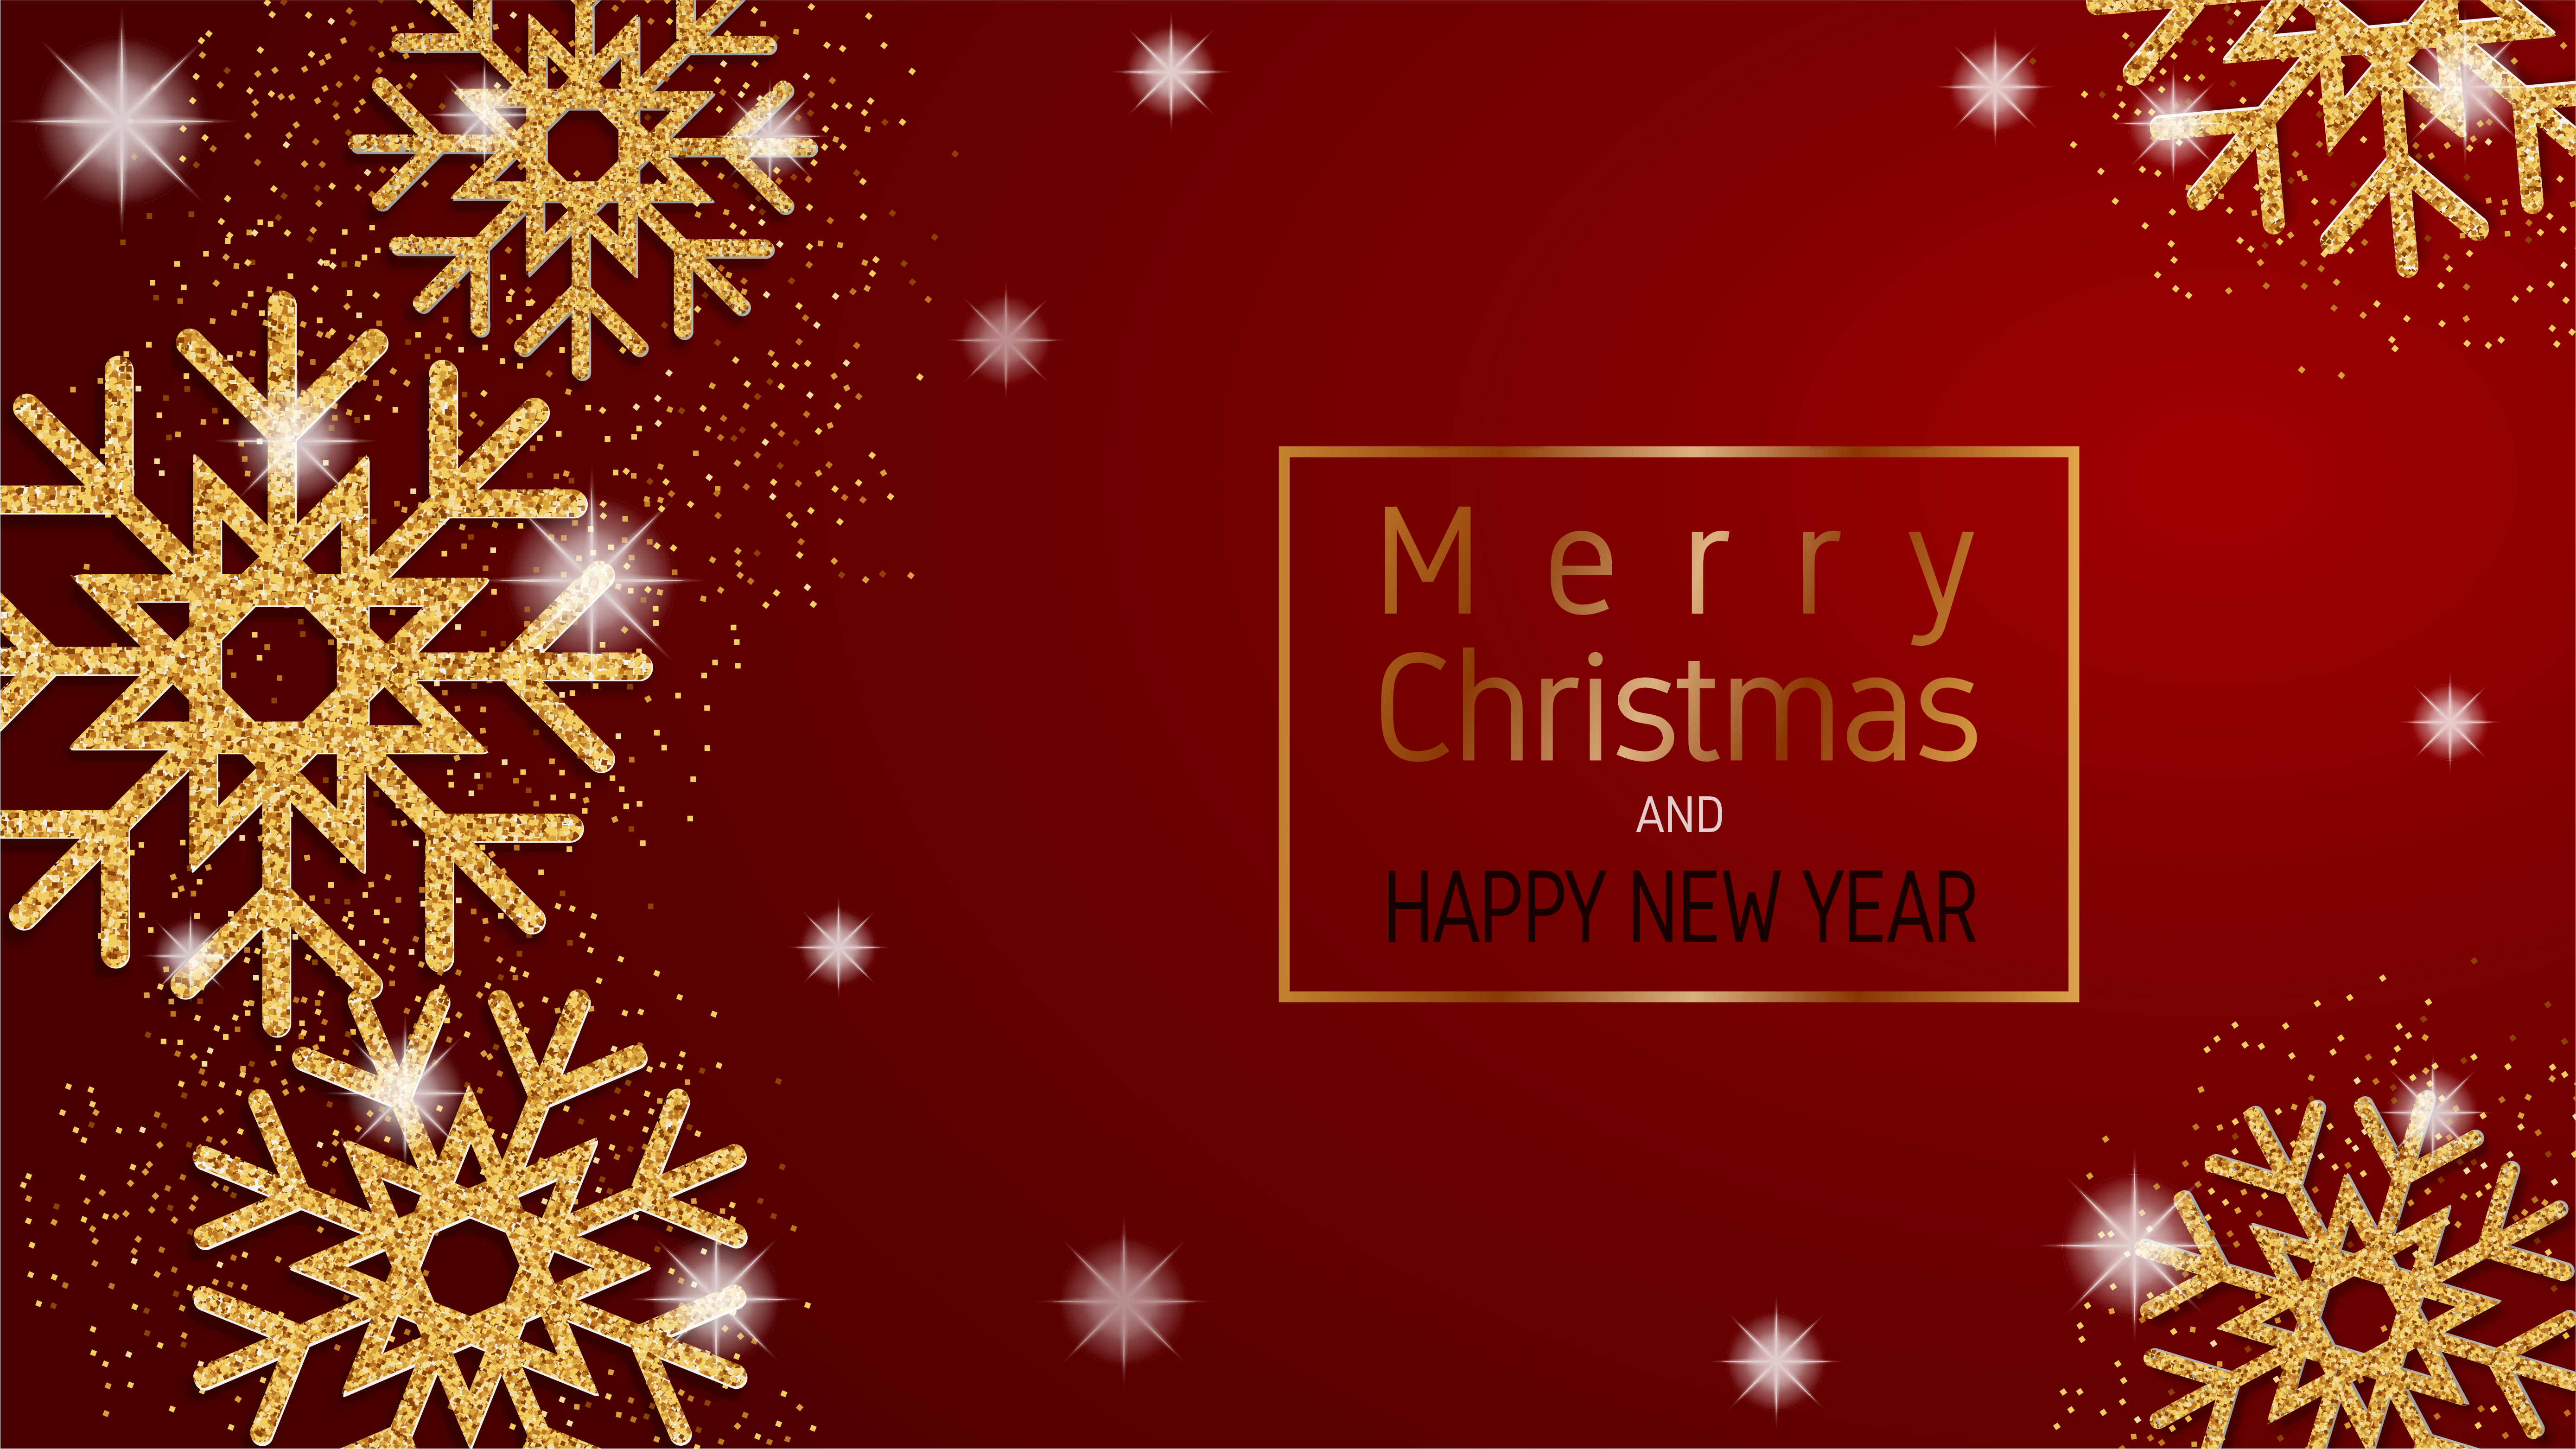 Merry Christmas and Happy New Year 2021 Images & HD 